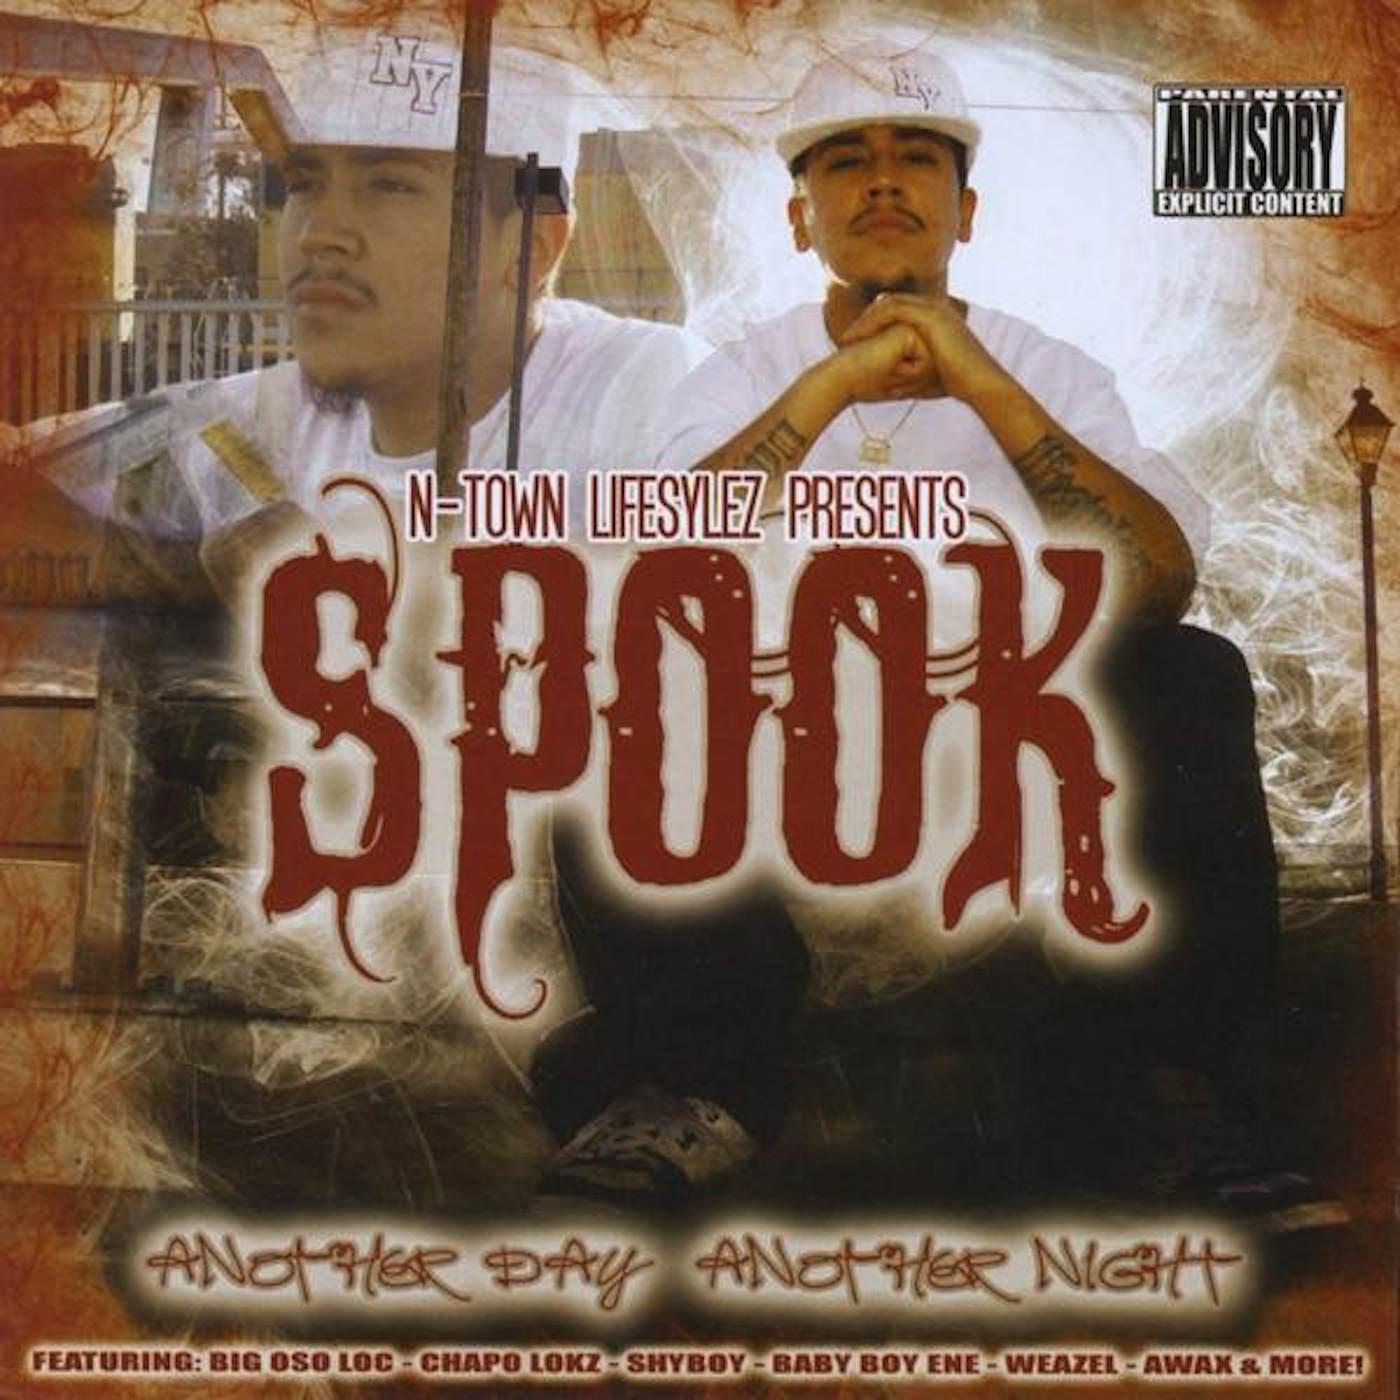 SPOOK ANOTHER DAY ANOTHER NIGHT CD